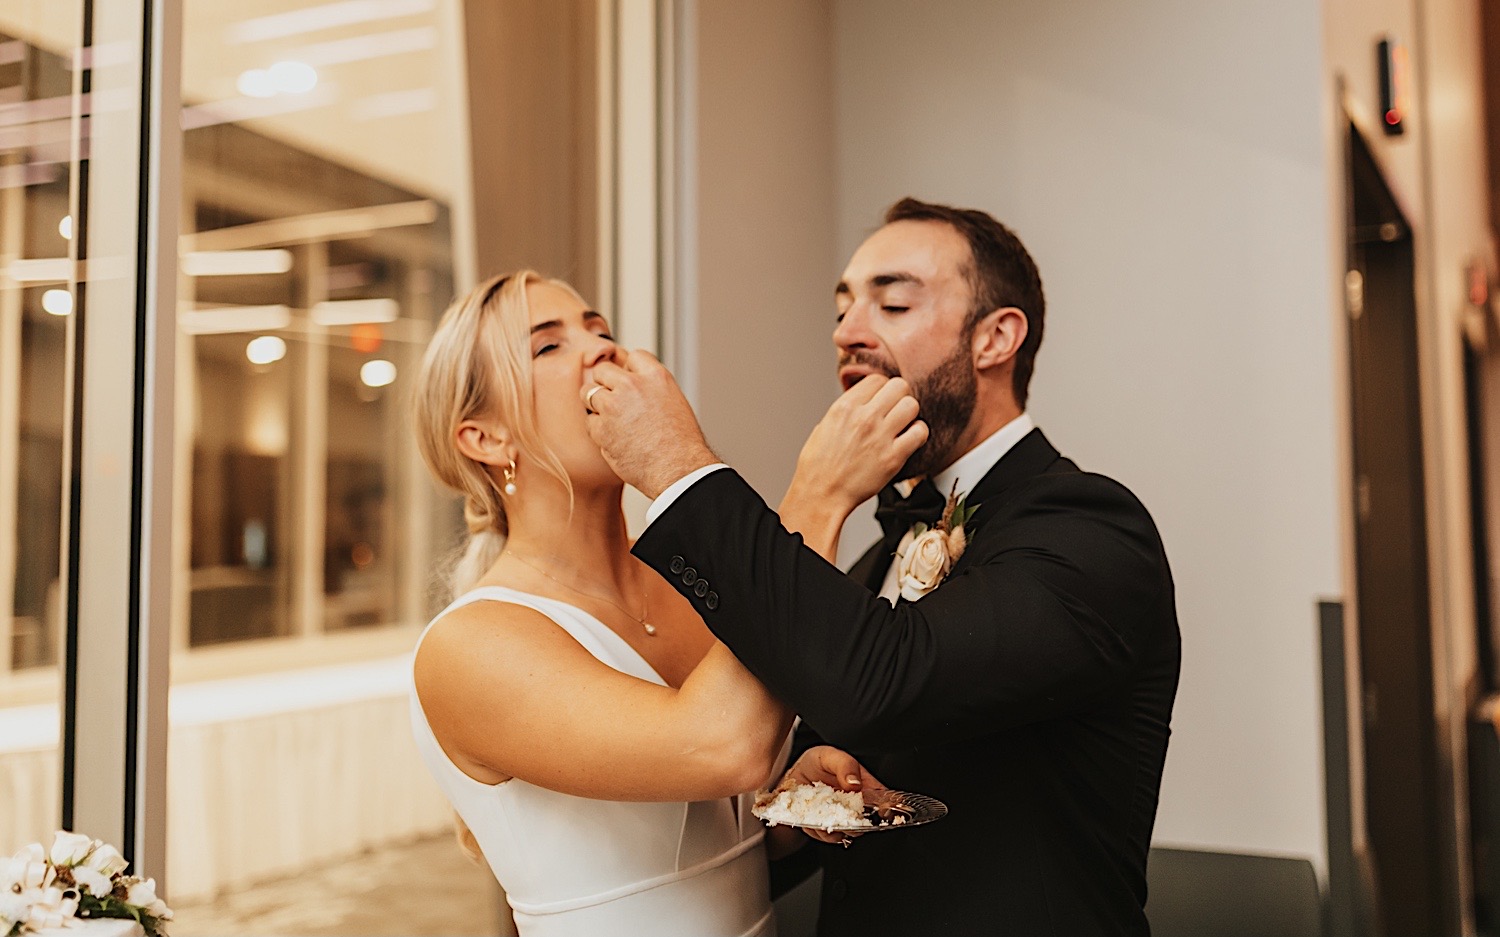 At a wedding reception in the La Crosse Center a bride and groom feed each other a piece of cake